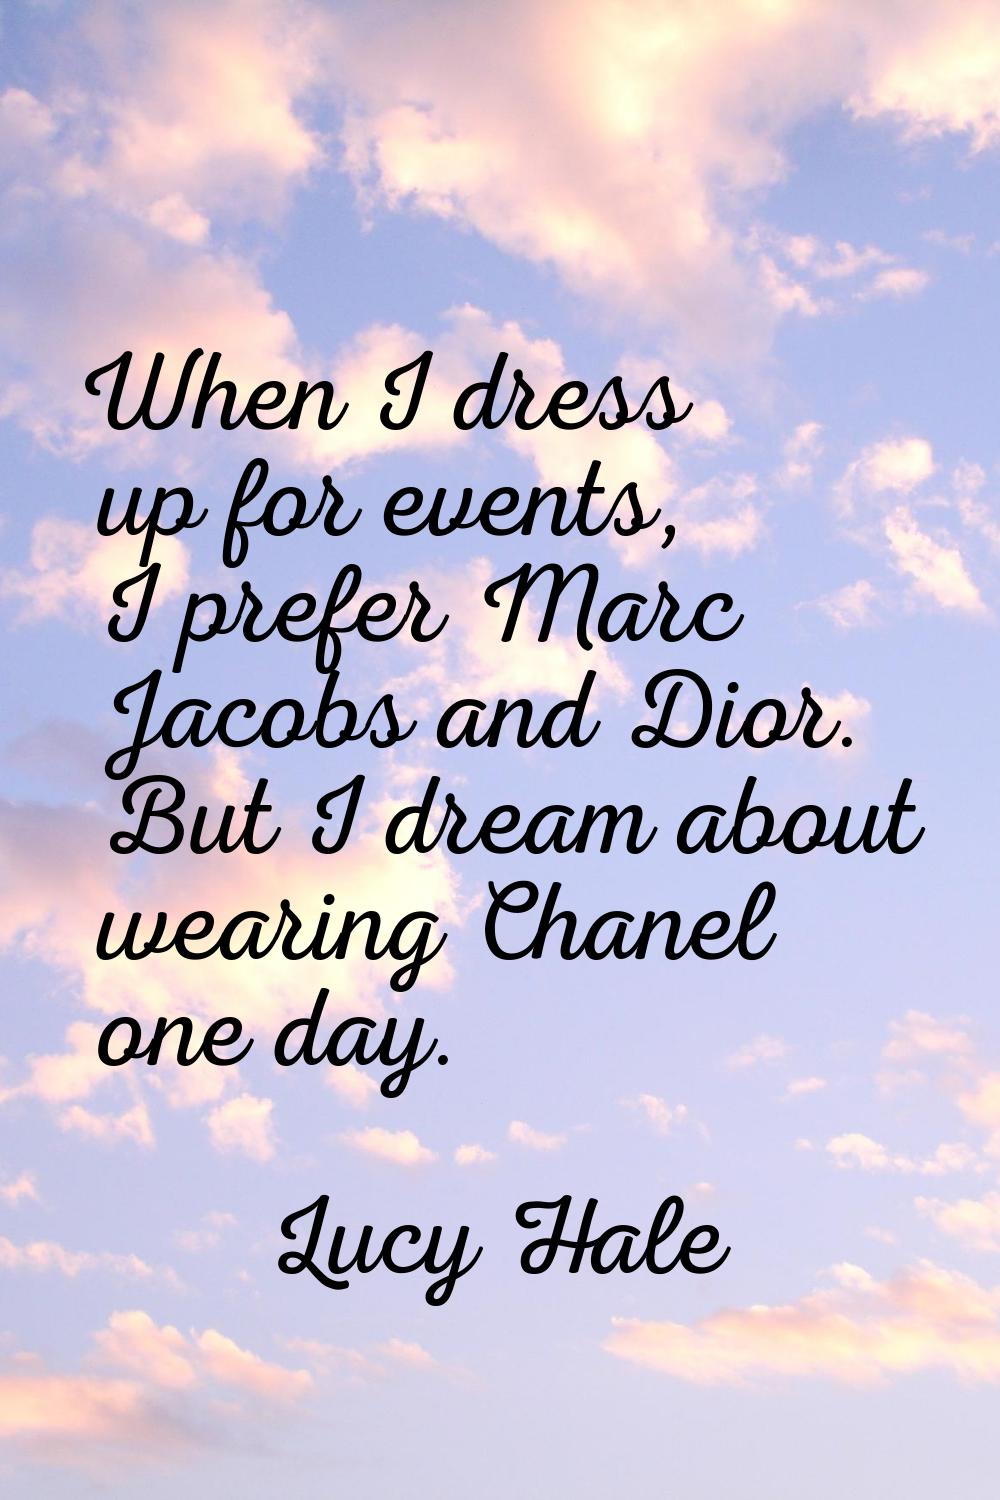 When I dress up for events, I prefer Marc Jacobs and Dior. But I dream about wearing Chanel one day